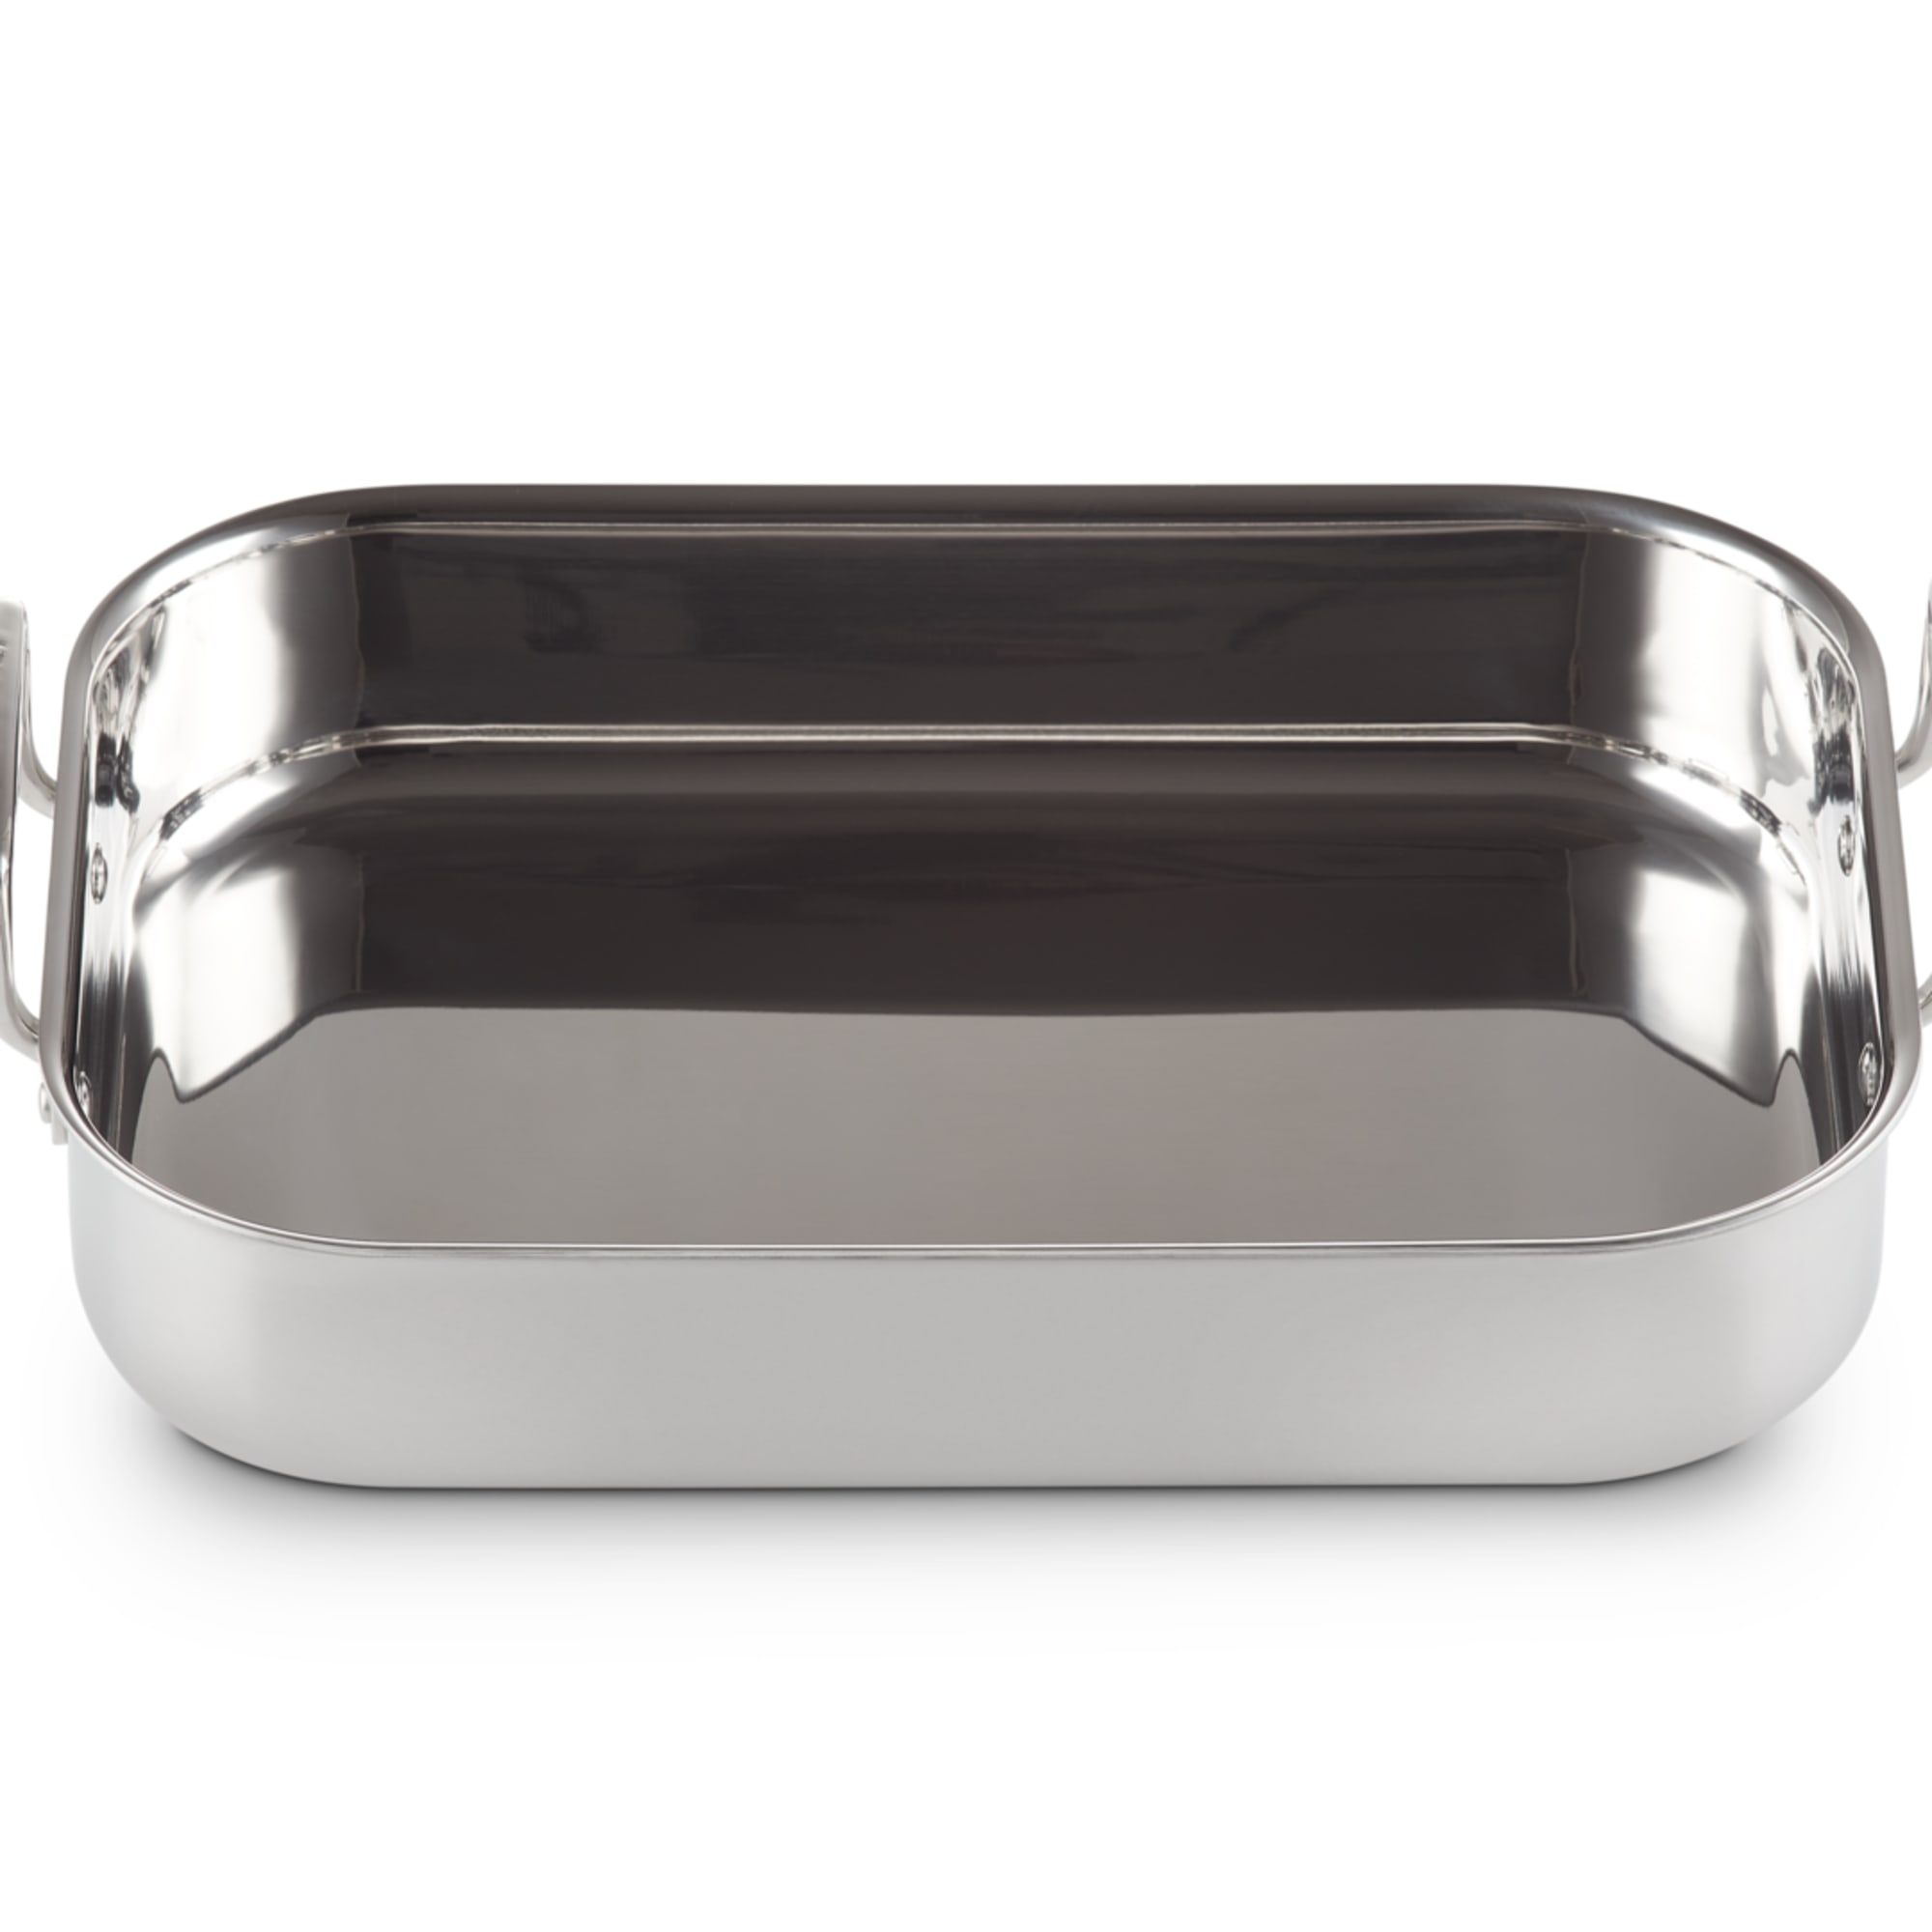 Le Creuset 3-Ply Stainless Steel Rectangular Roaster 35x25cm Image 2